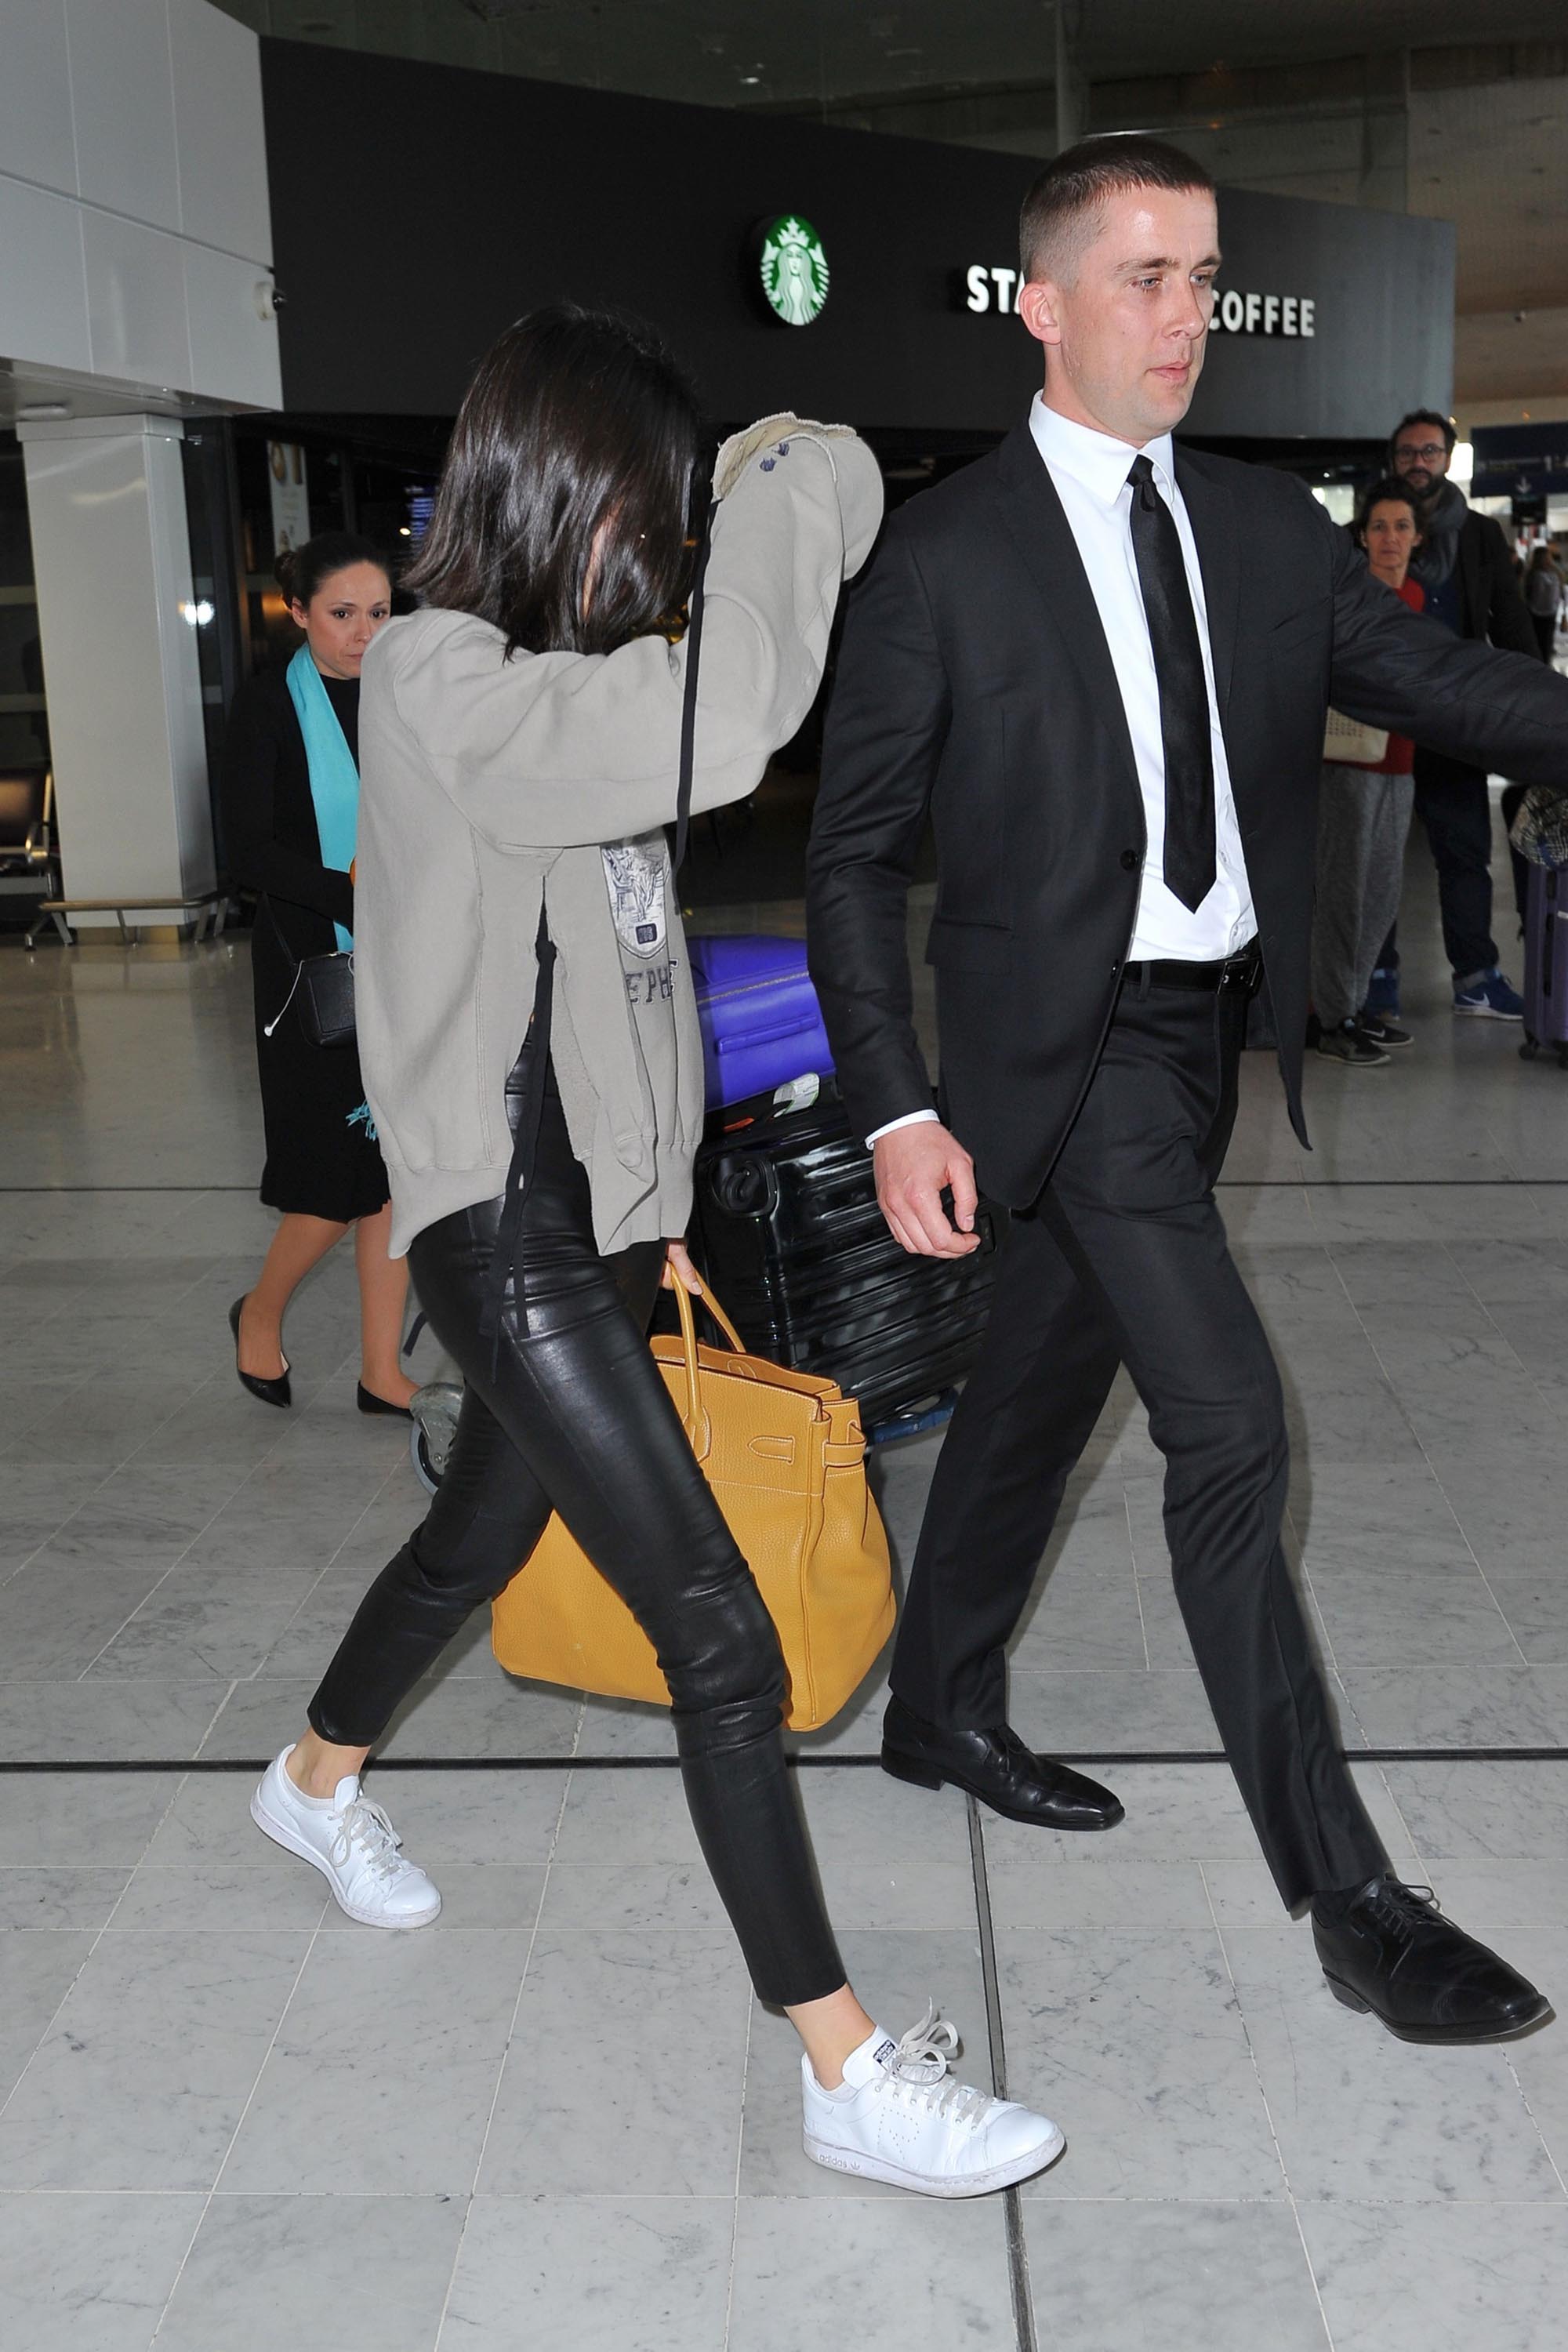 Kendall Jenner leaving the Charles de Gaulle airport